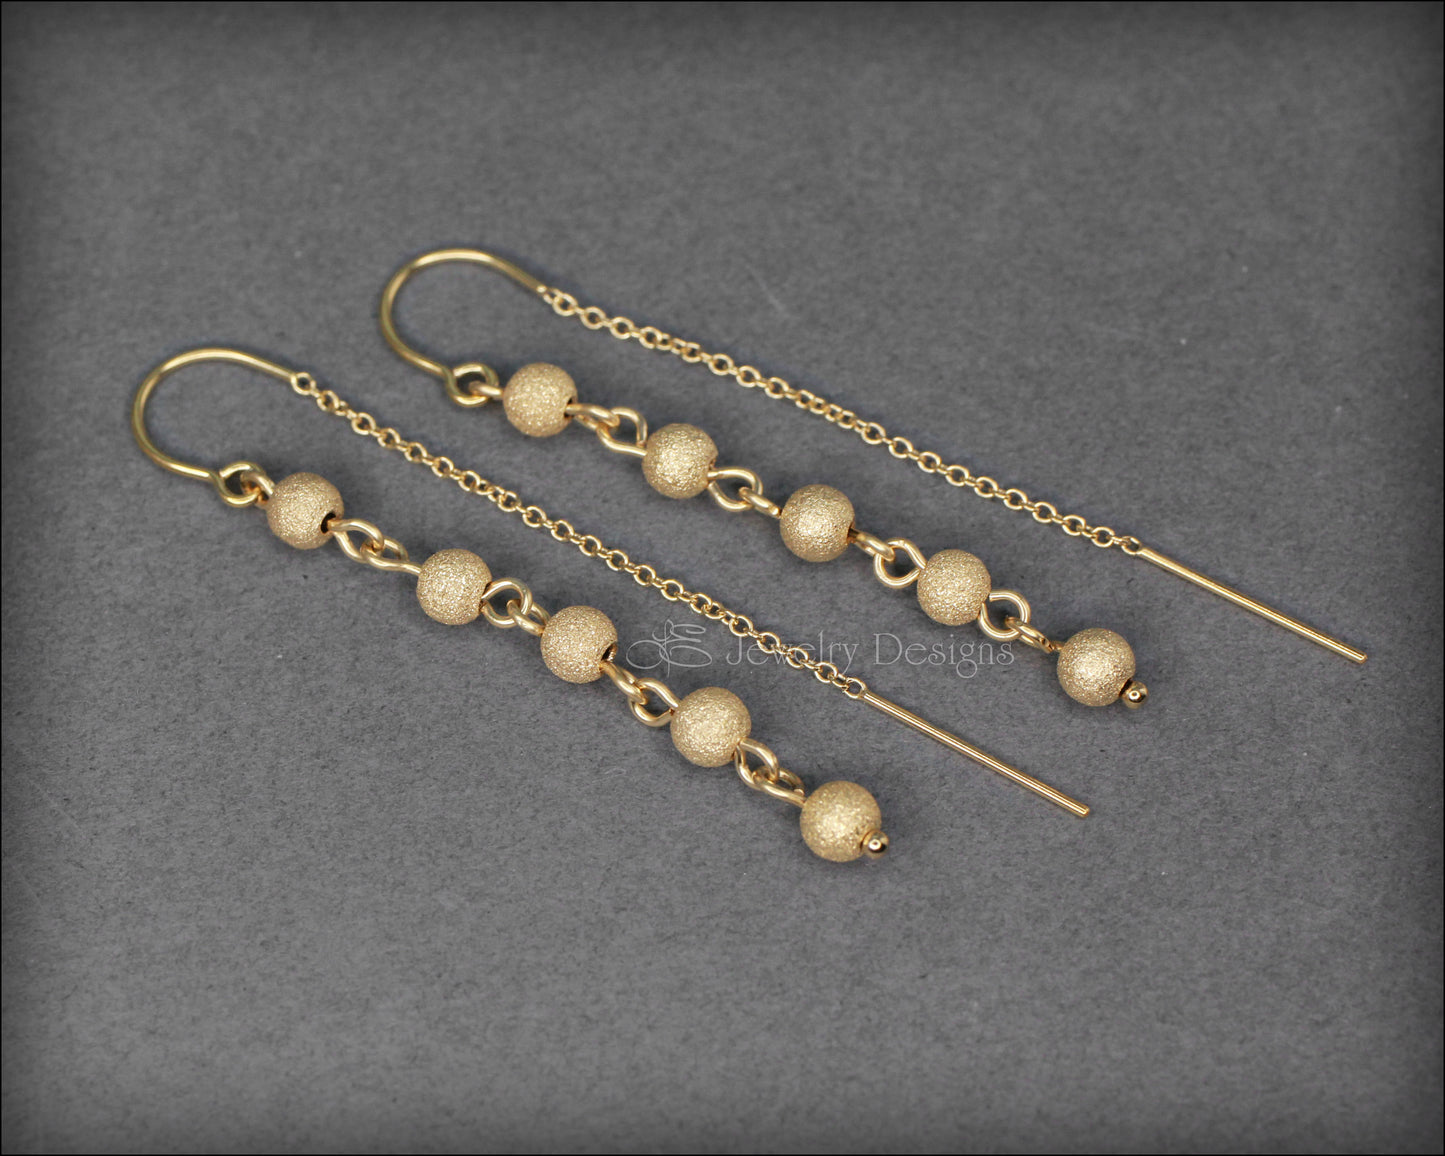 Stardust Threader Earrings (sterling, 14k gold-filled) - LE Jewelry Designs